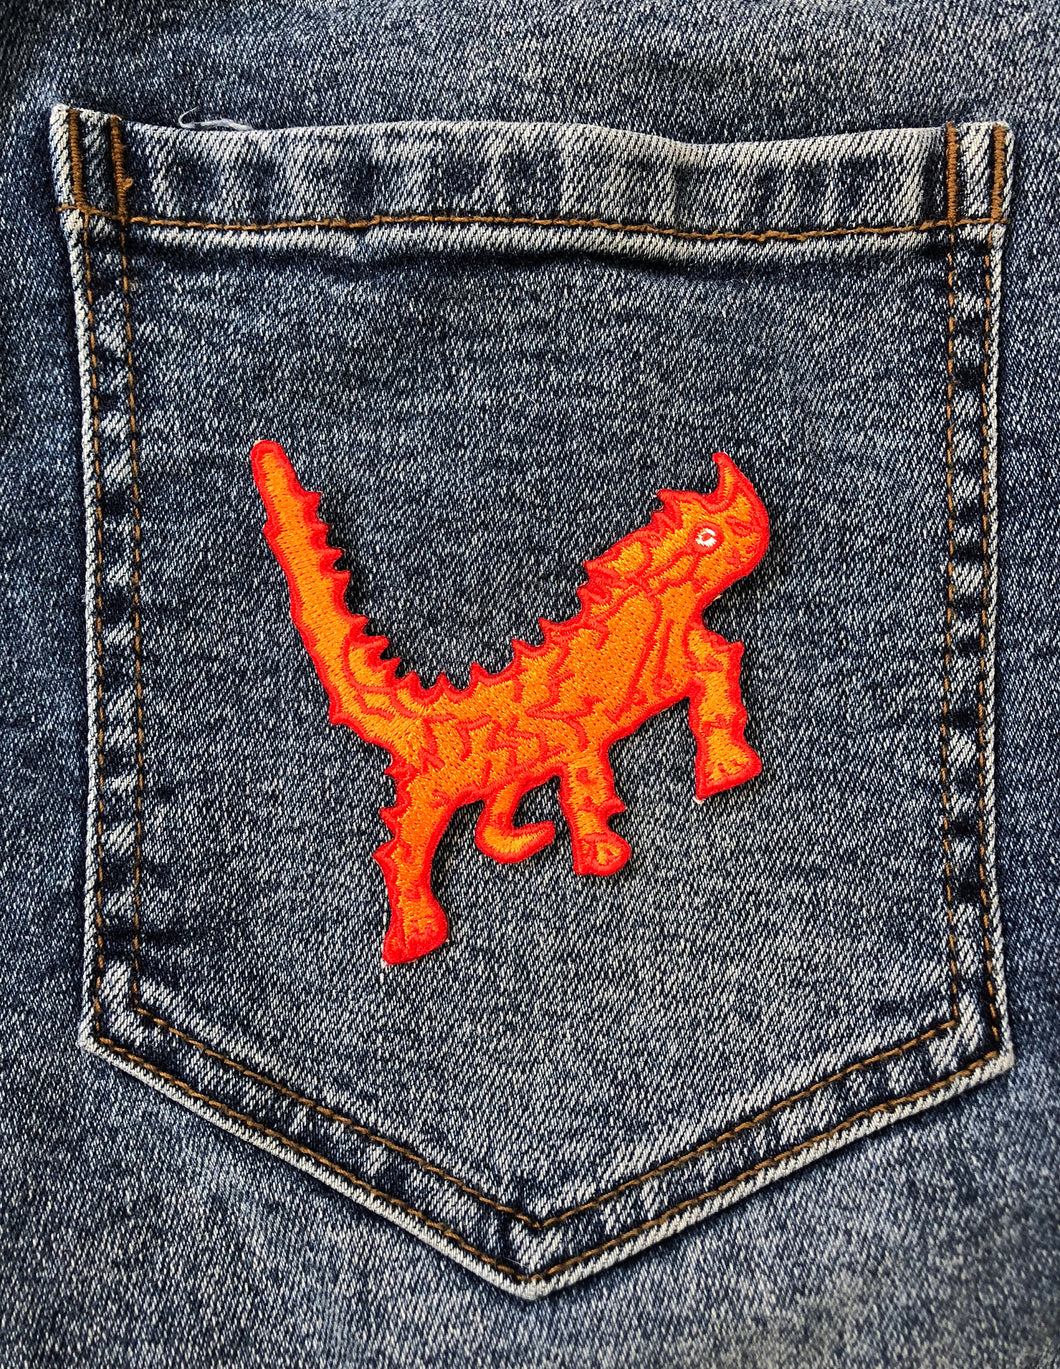 Thorny Devil Lizard Clothes Patch